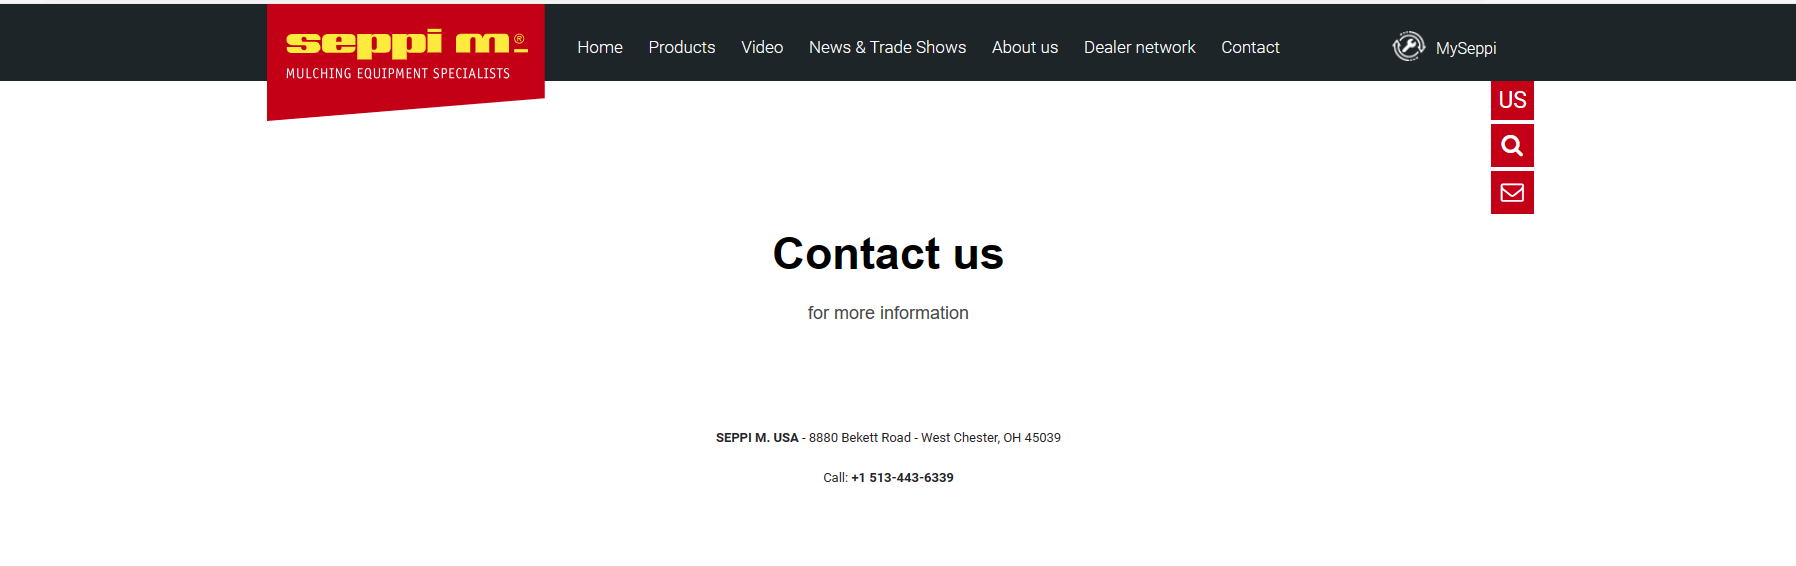 Seppi m contact number Ohio.PNG